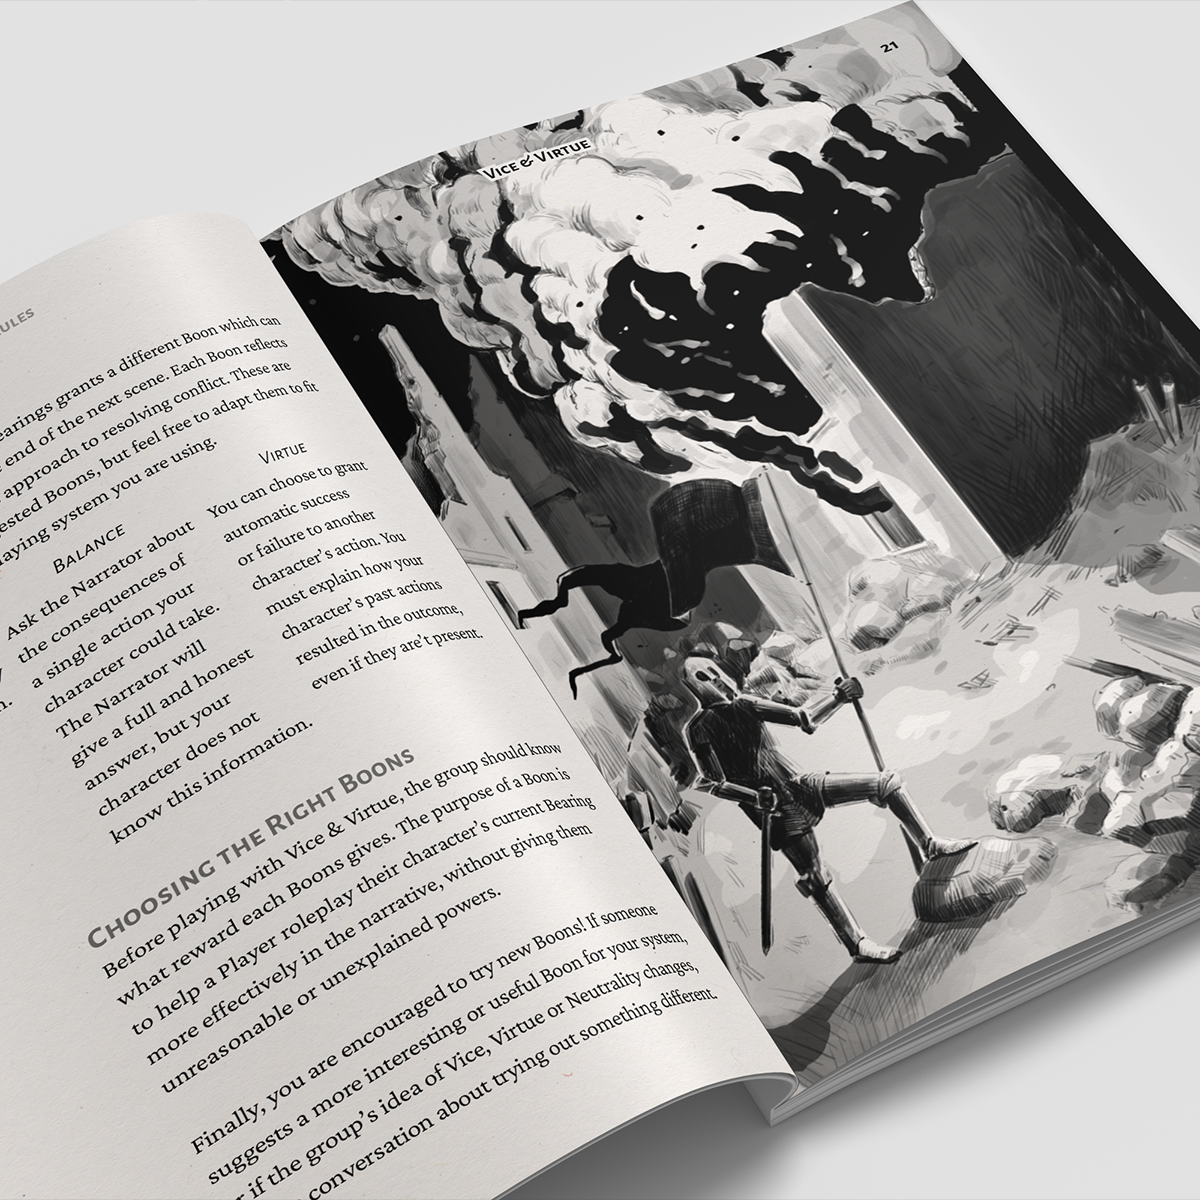 Image shows an open spread from Vice & Virtue. On the left hand page reads the header "Choosing the Right Boons', and the right hand page shows a knight bearing a black banner, looking away from burning building.